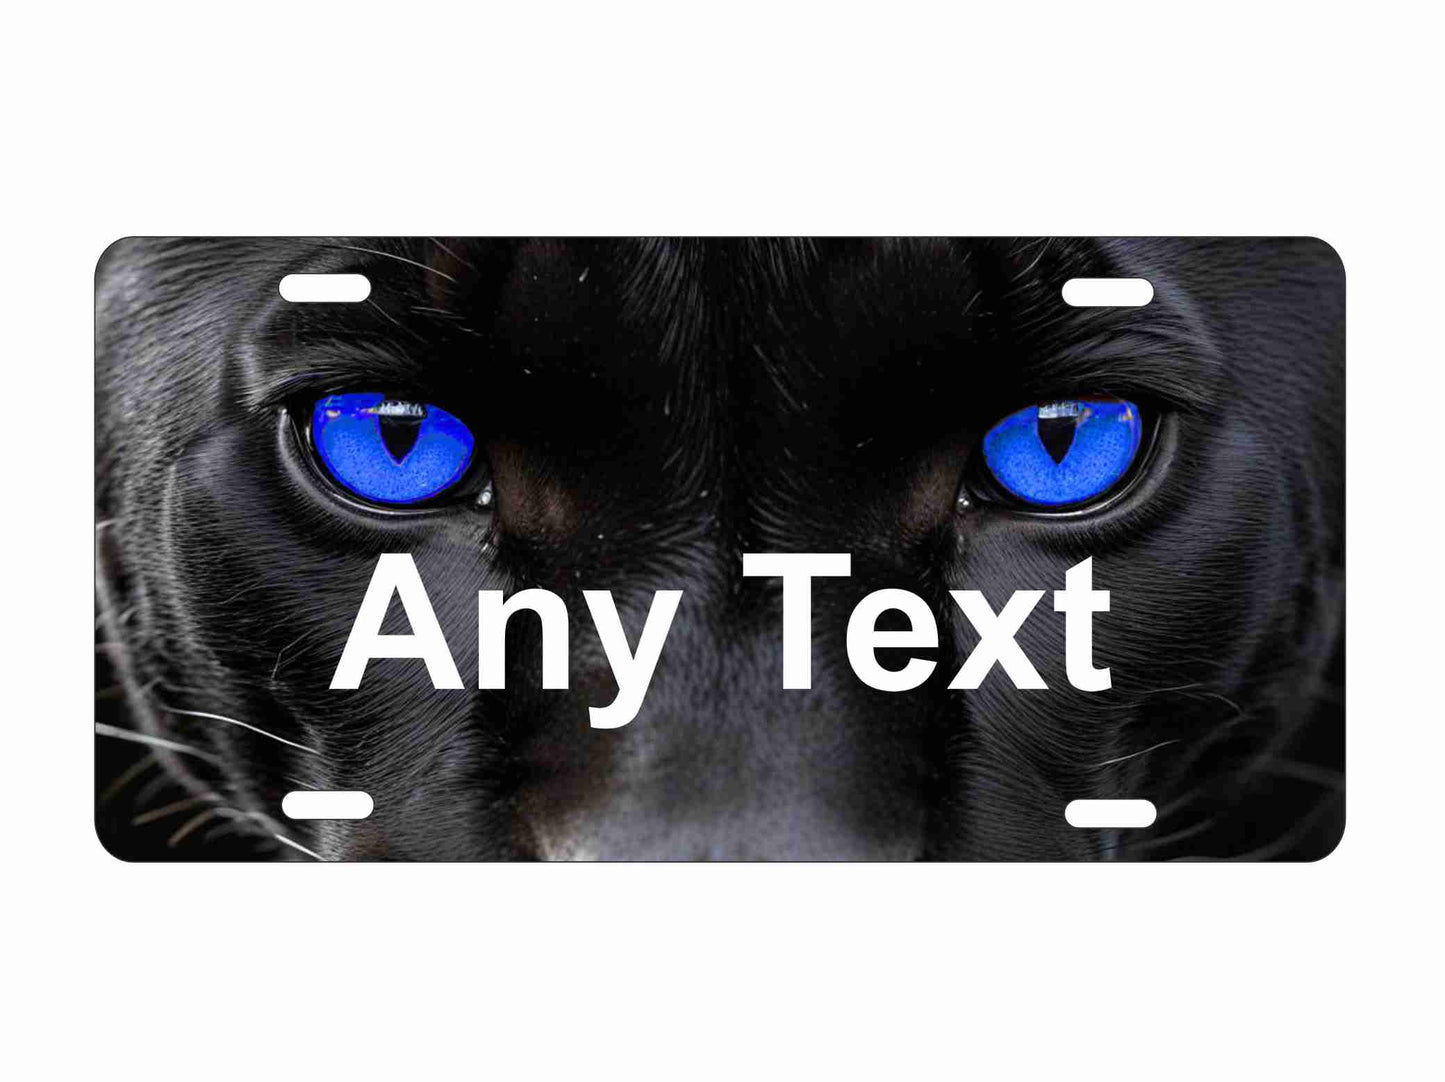 Panther face blue eyes personalized novelty front license plate Decorative custom vanity car tag